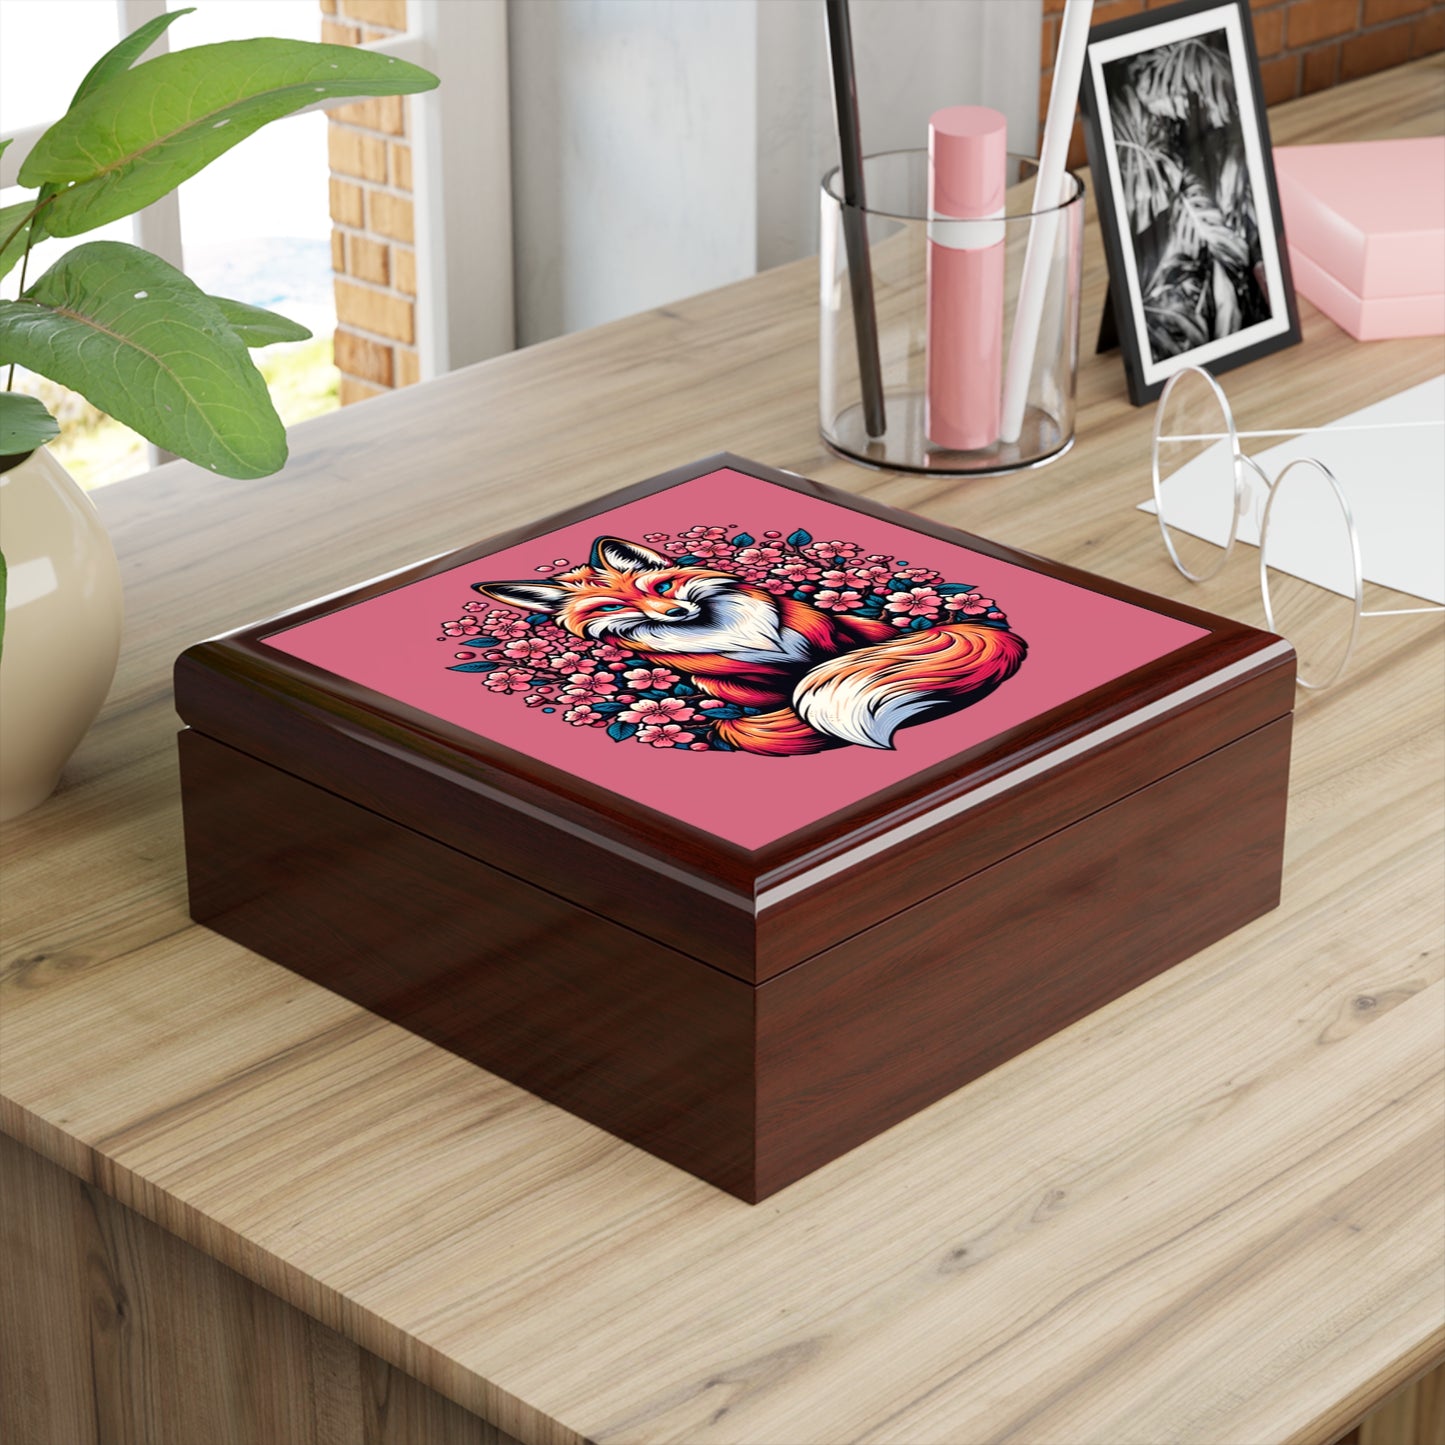 Red Fox surrounded by Cherry Blossoms Jewelry Keepsake Box